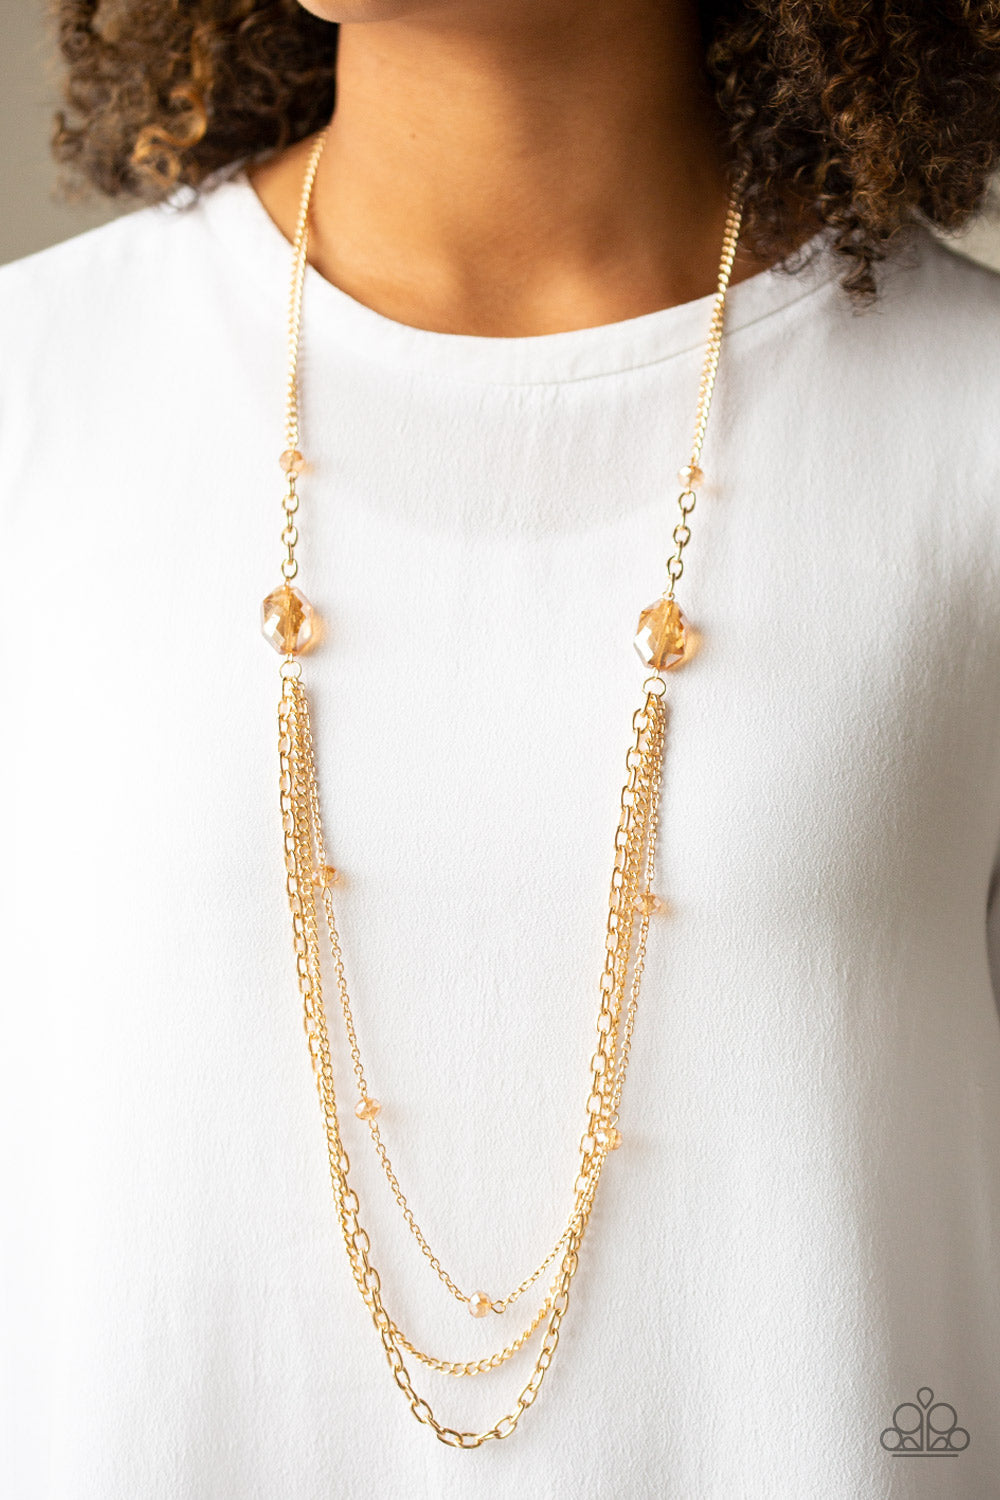 Paparazzi Dare to Dazzle - Gold - Gems - Layered Chains - Necklace & Earrings - $5 Jewelry with Ashley Swint